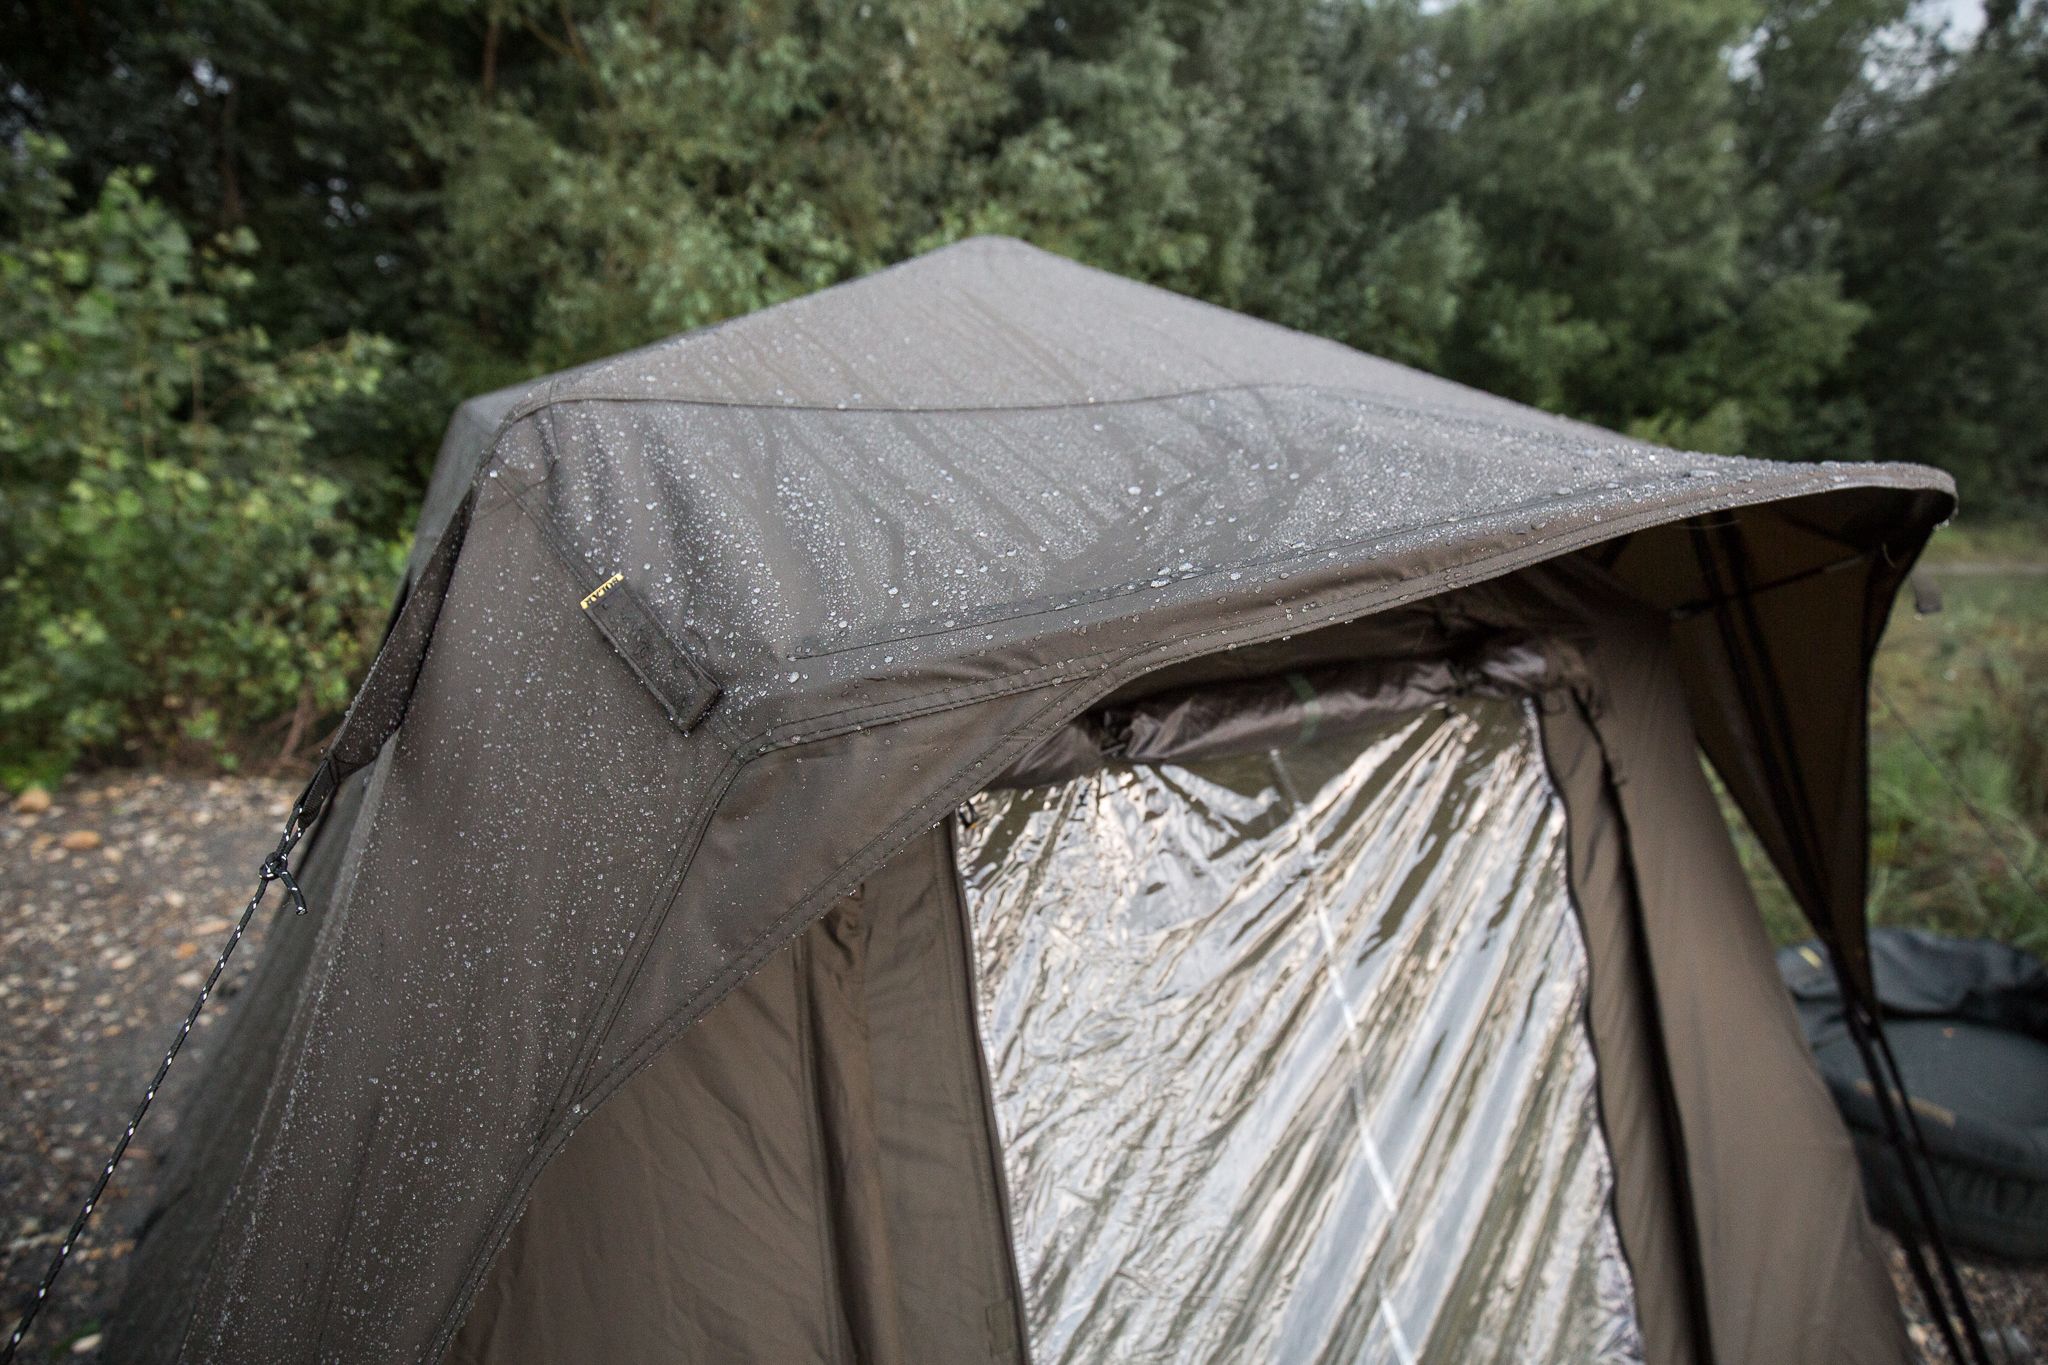 Solar SP Quick-Up Shelter Green MKII With Heavy-Duty Groundsheet